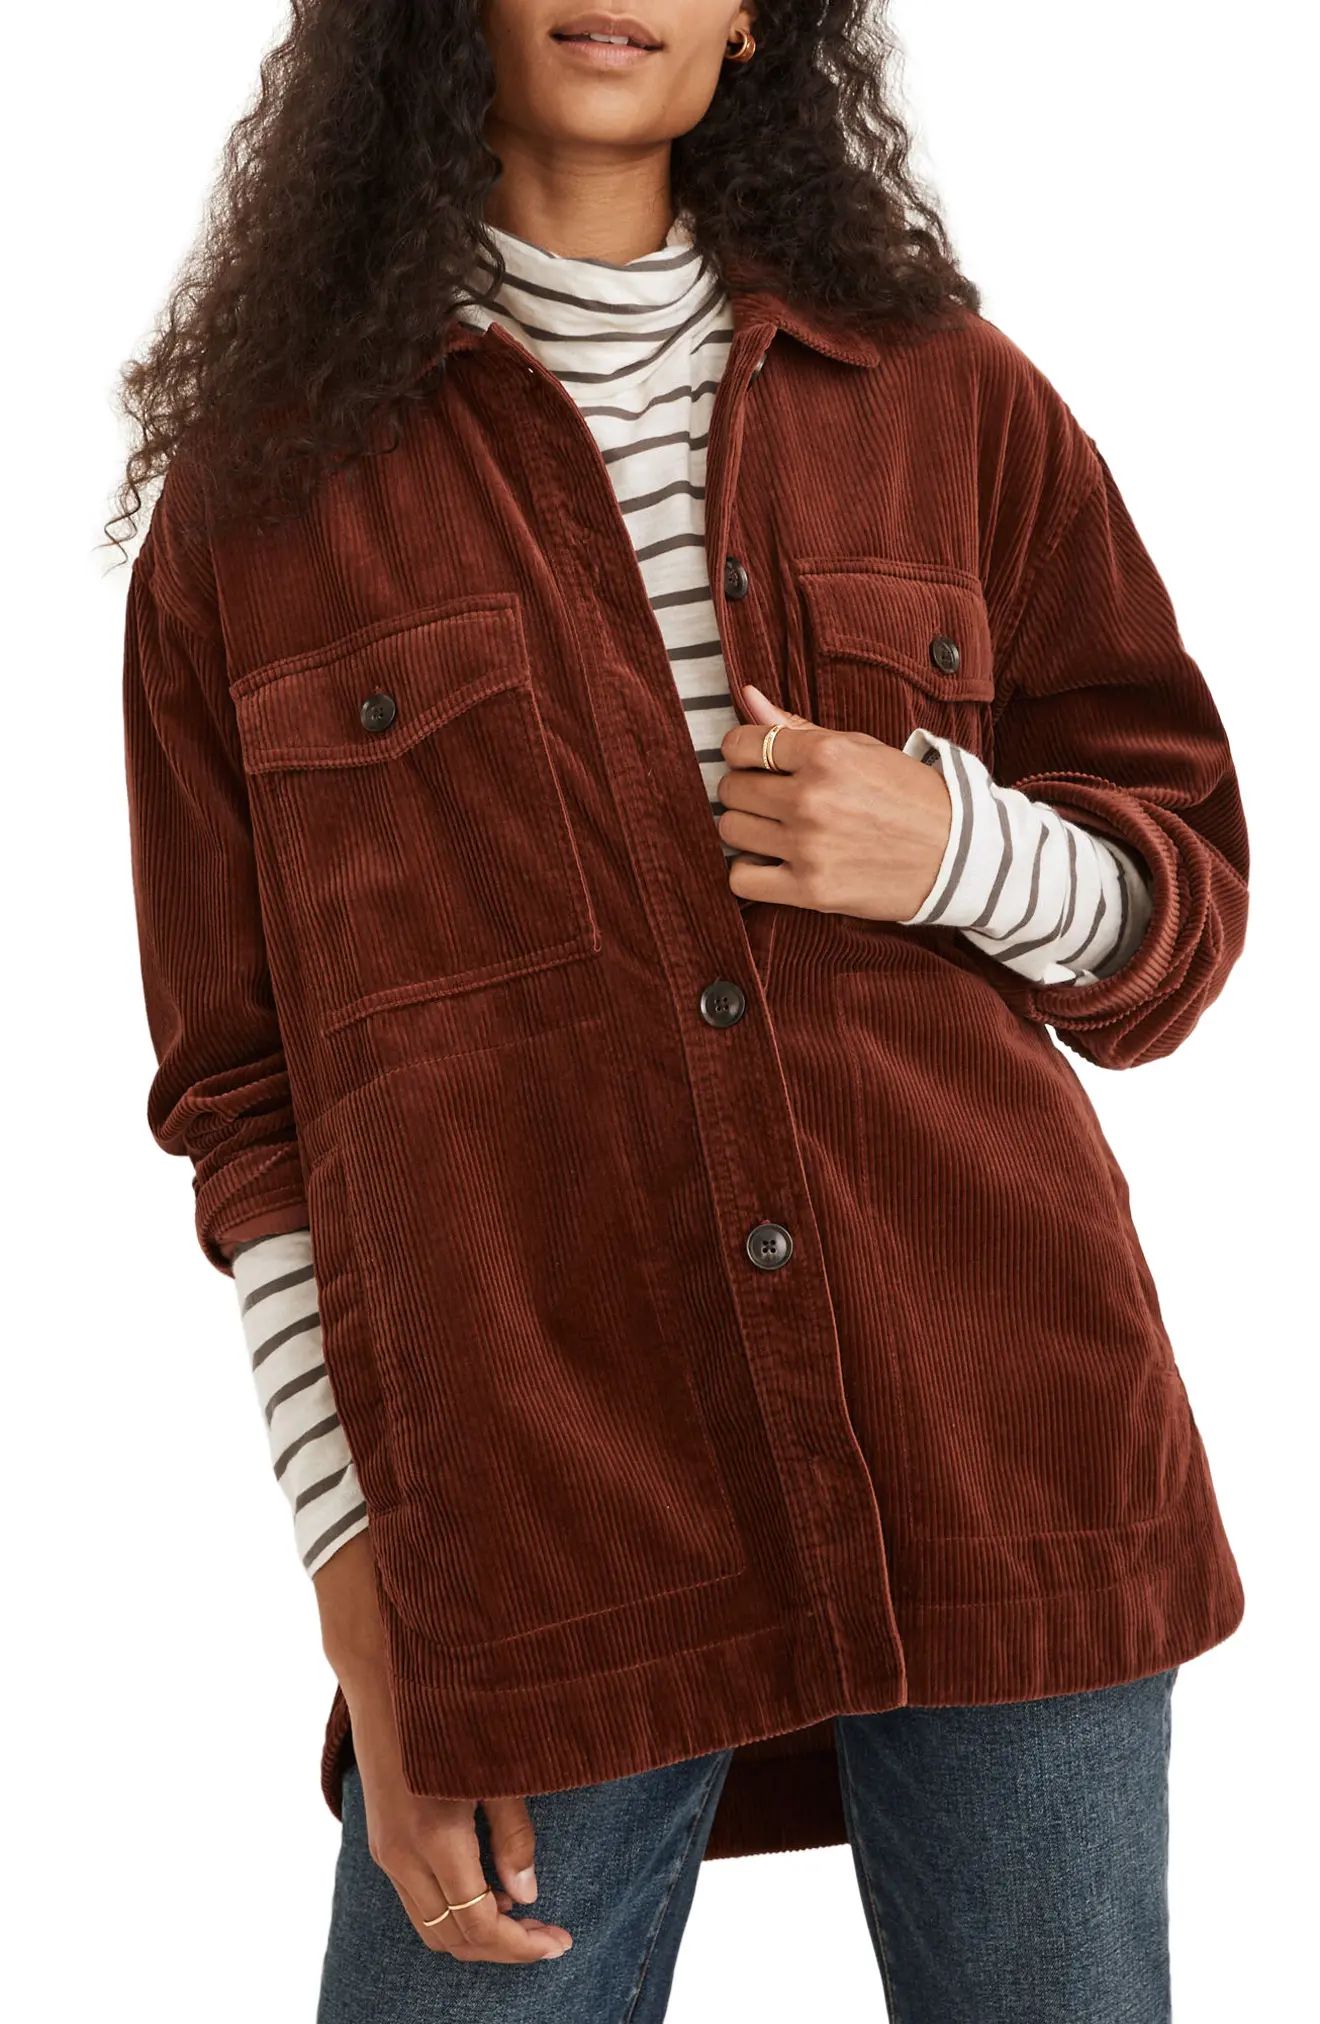 Madewell Yorkway Cotton Corduroy Shirt Jacket, Size Small in Stained Mahogany at Nordstrom | Nordstrom